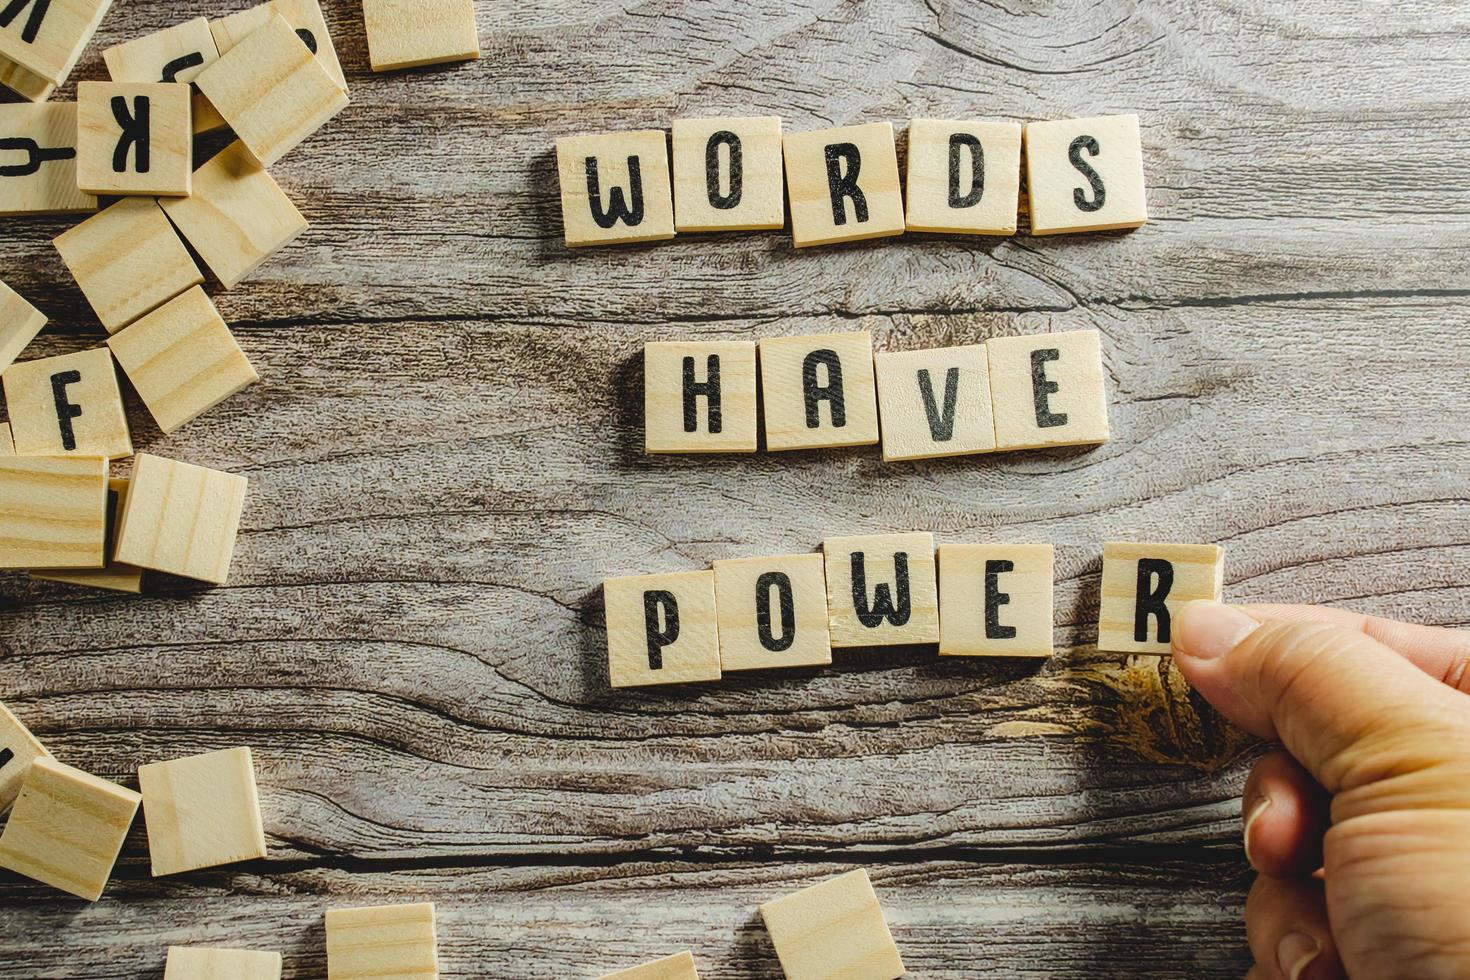 Words Have Power word cube on wood background ,English language learning concept photo